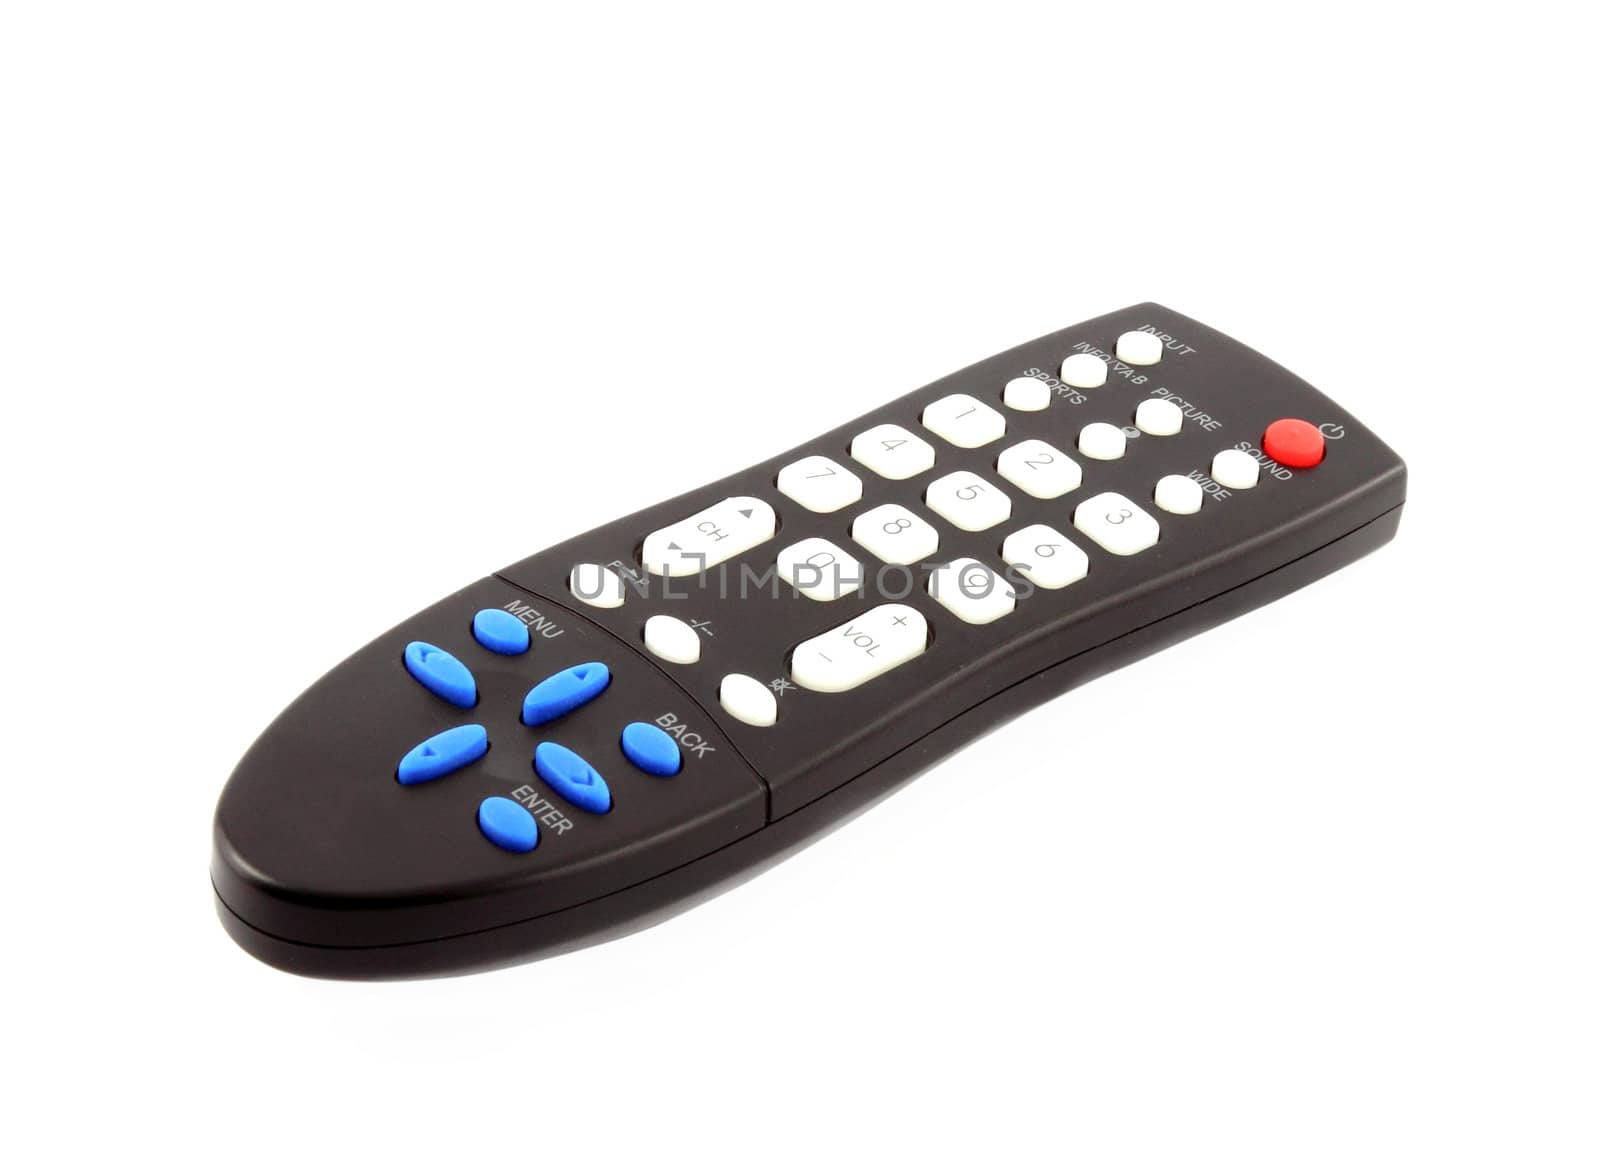 black TV remote control isolated on white background